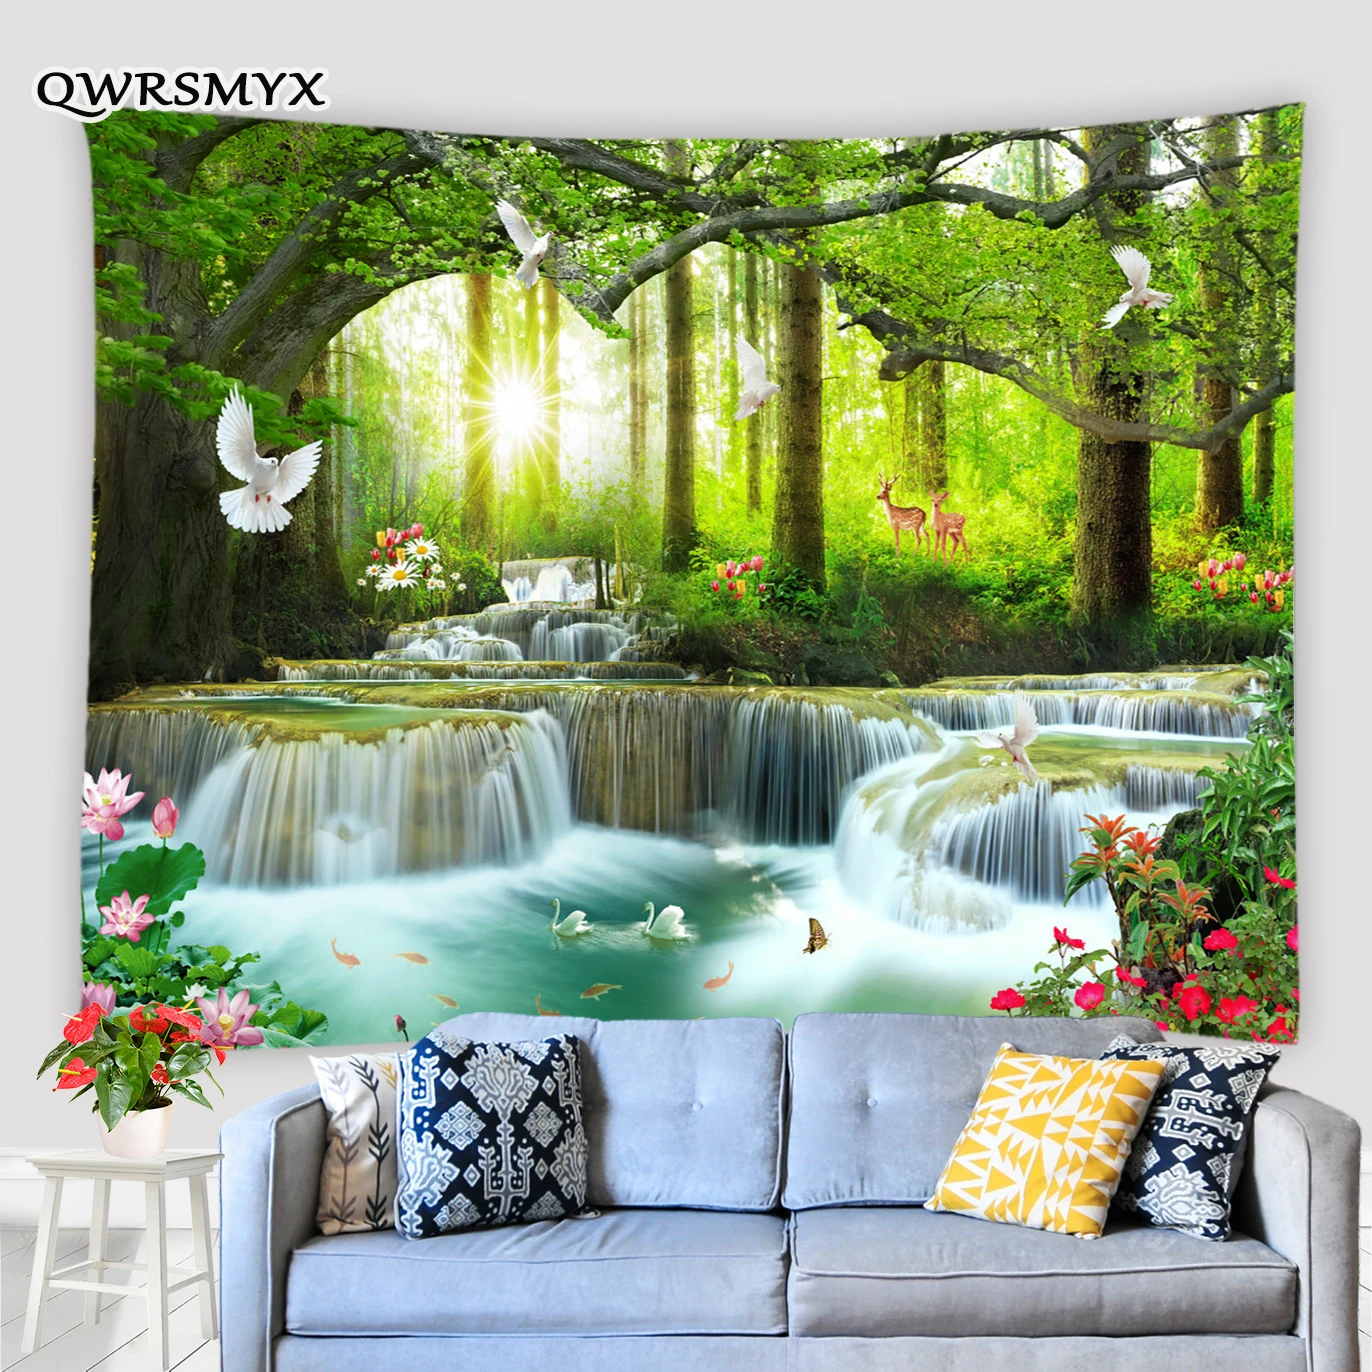 

Forest Waterfall Deer Oil Painting Landscape Tapestry Wall Hanging Living Room Bedroom Decor Wall Aesthetics Art Tapestries